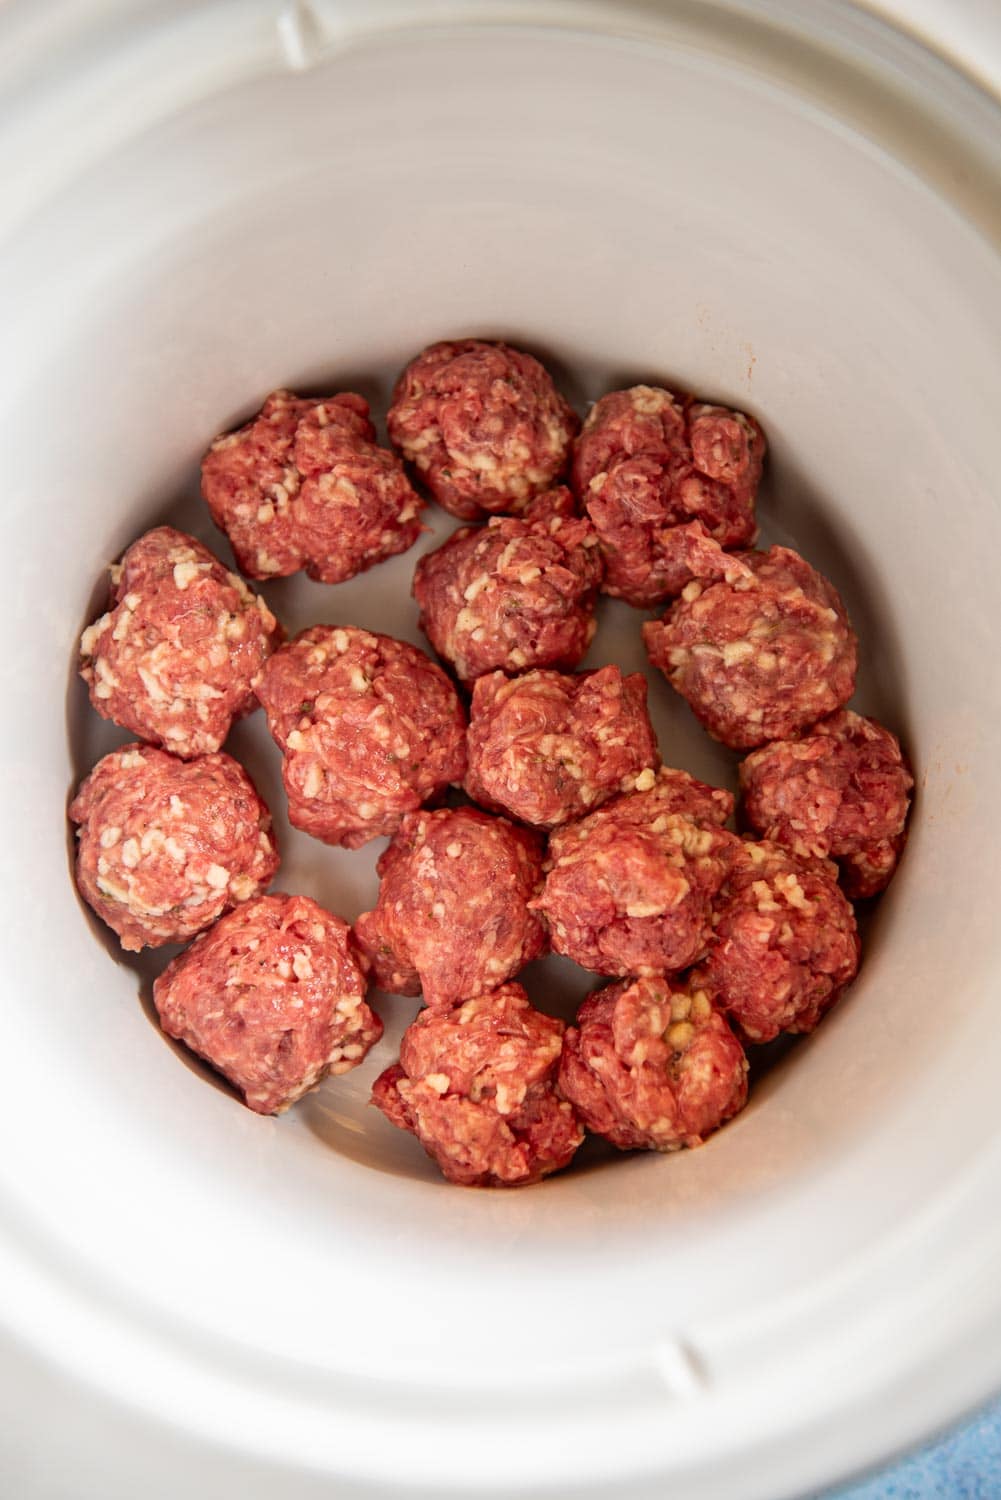 Raw quarter sized meatballs in a slow cooker white bowl